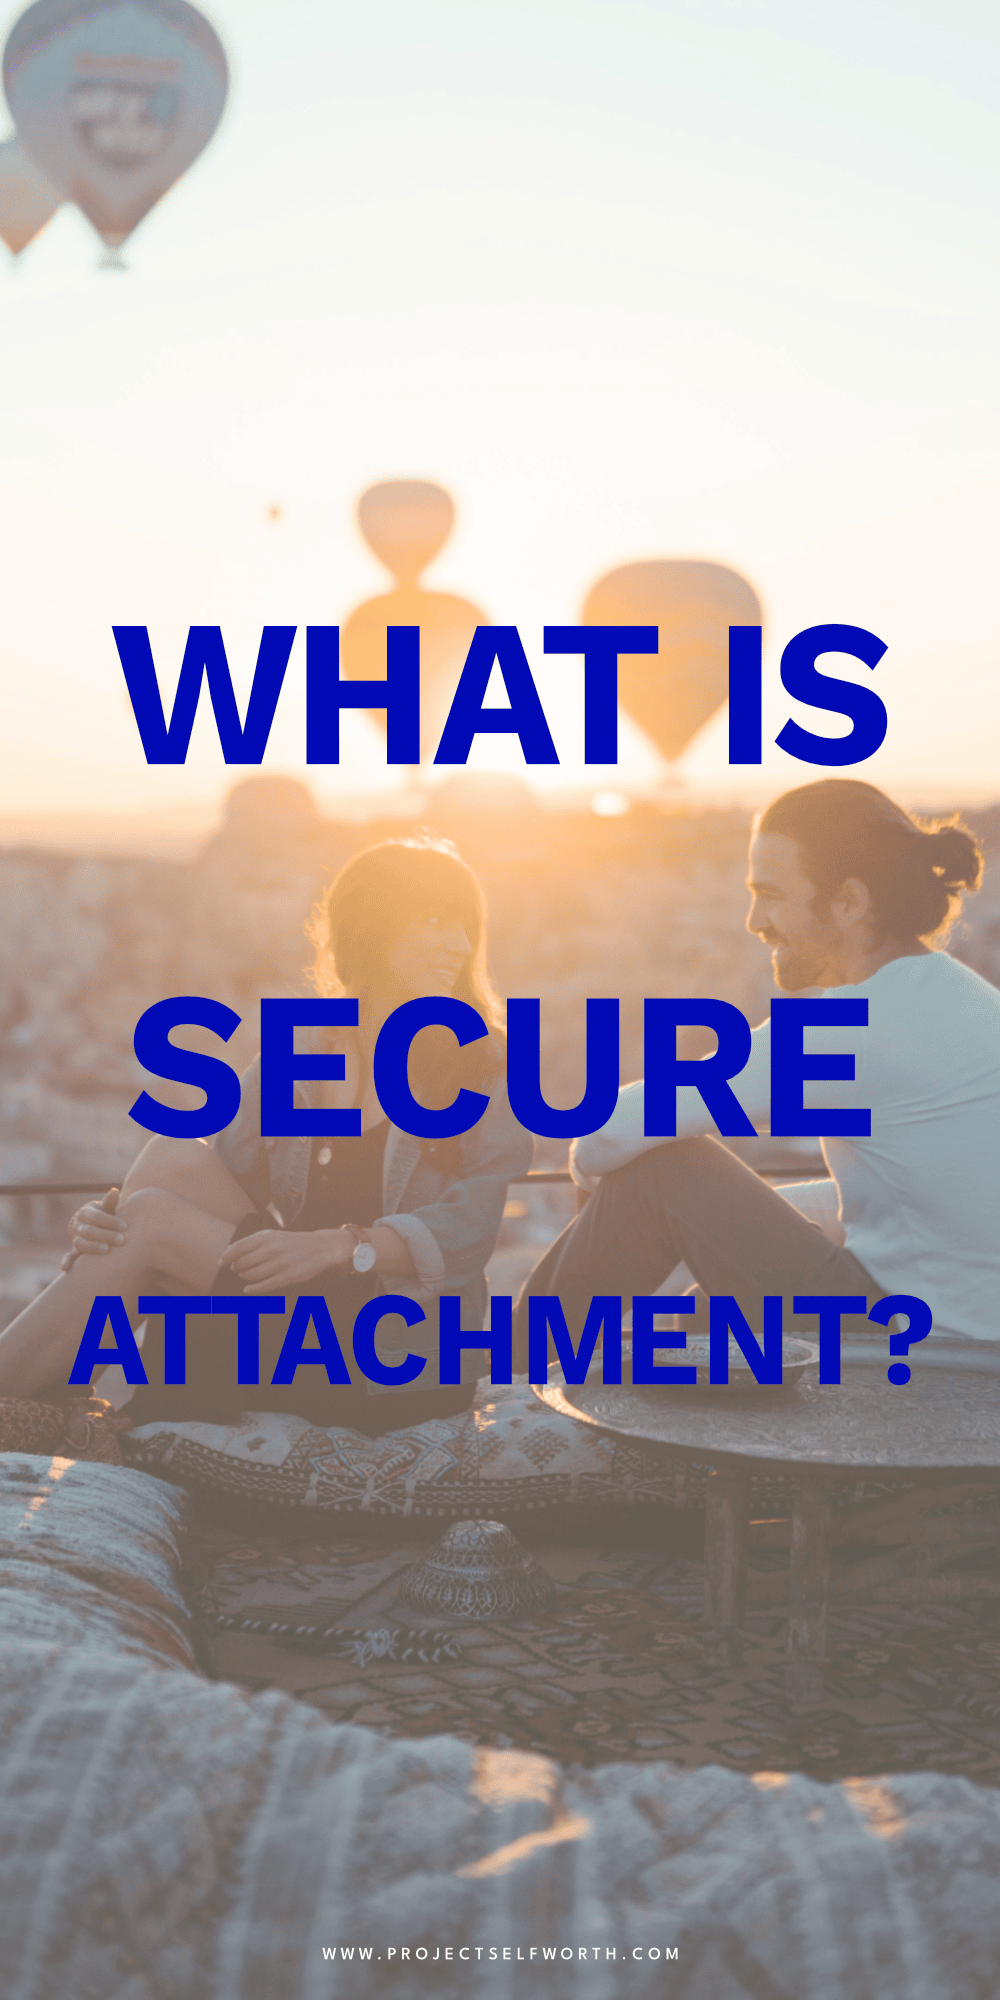 What Is Secure Attachment?